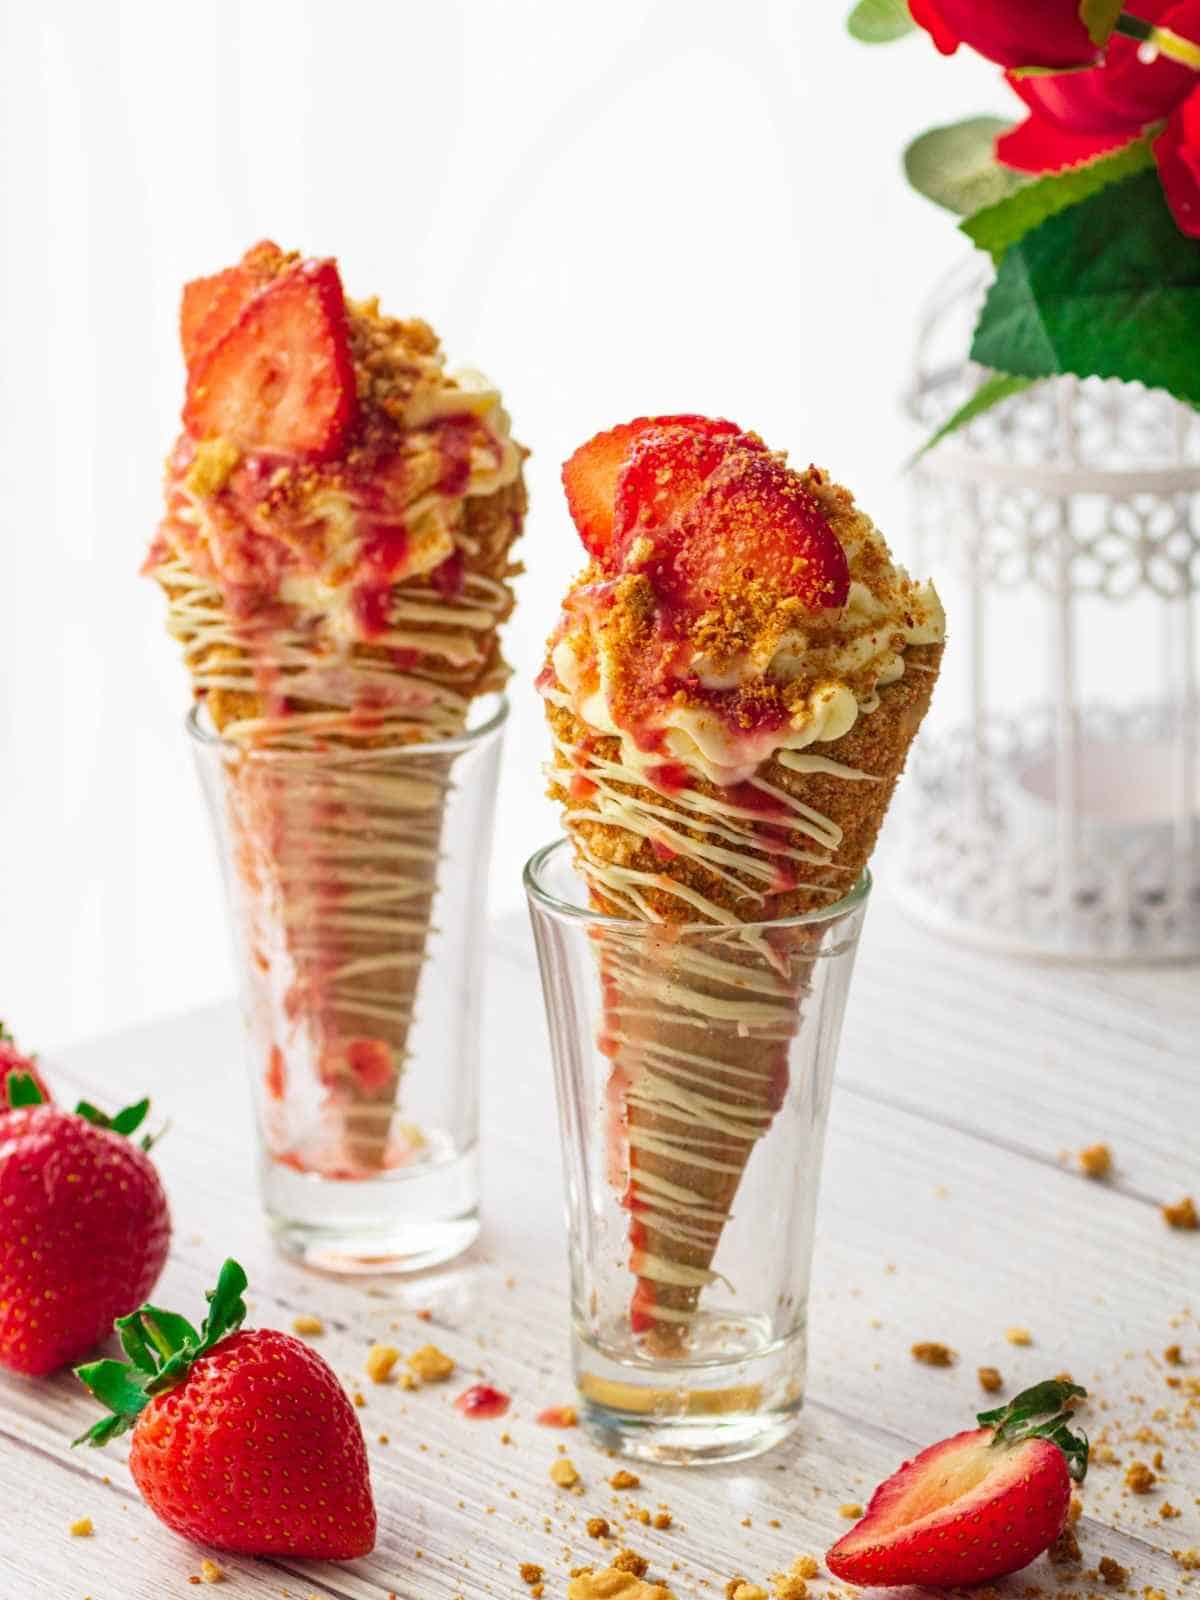 Waffle cones filled with strawberry cream cheese ice cream and home made strawberry jam.